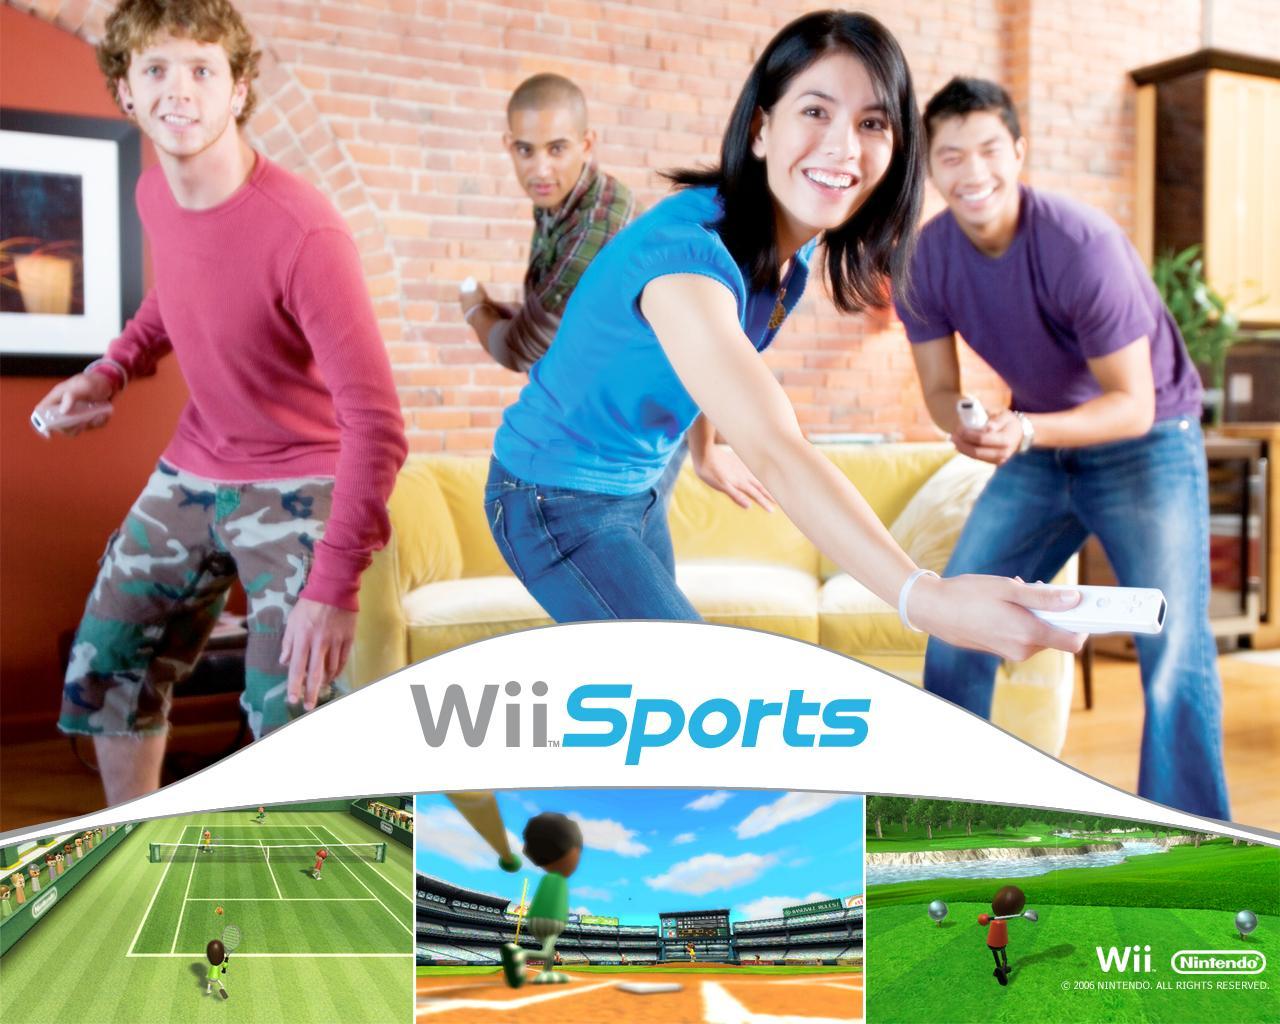 Wii Sports Laptop Wallpaper, Wii Sports, Game